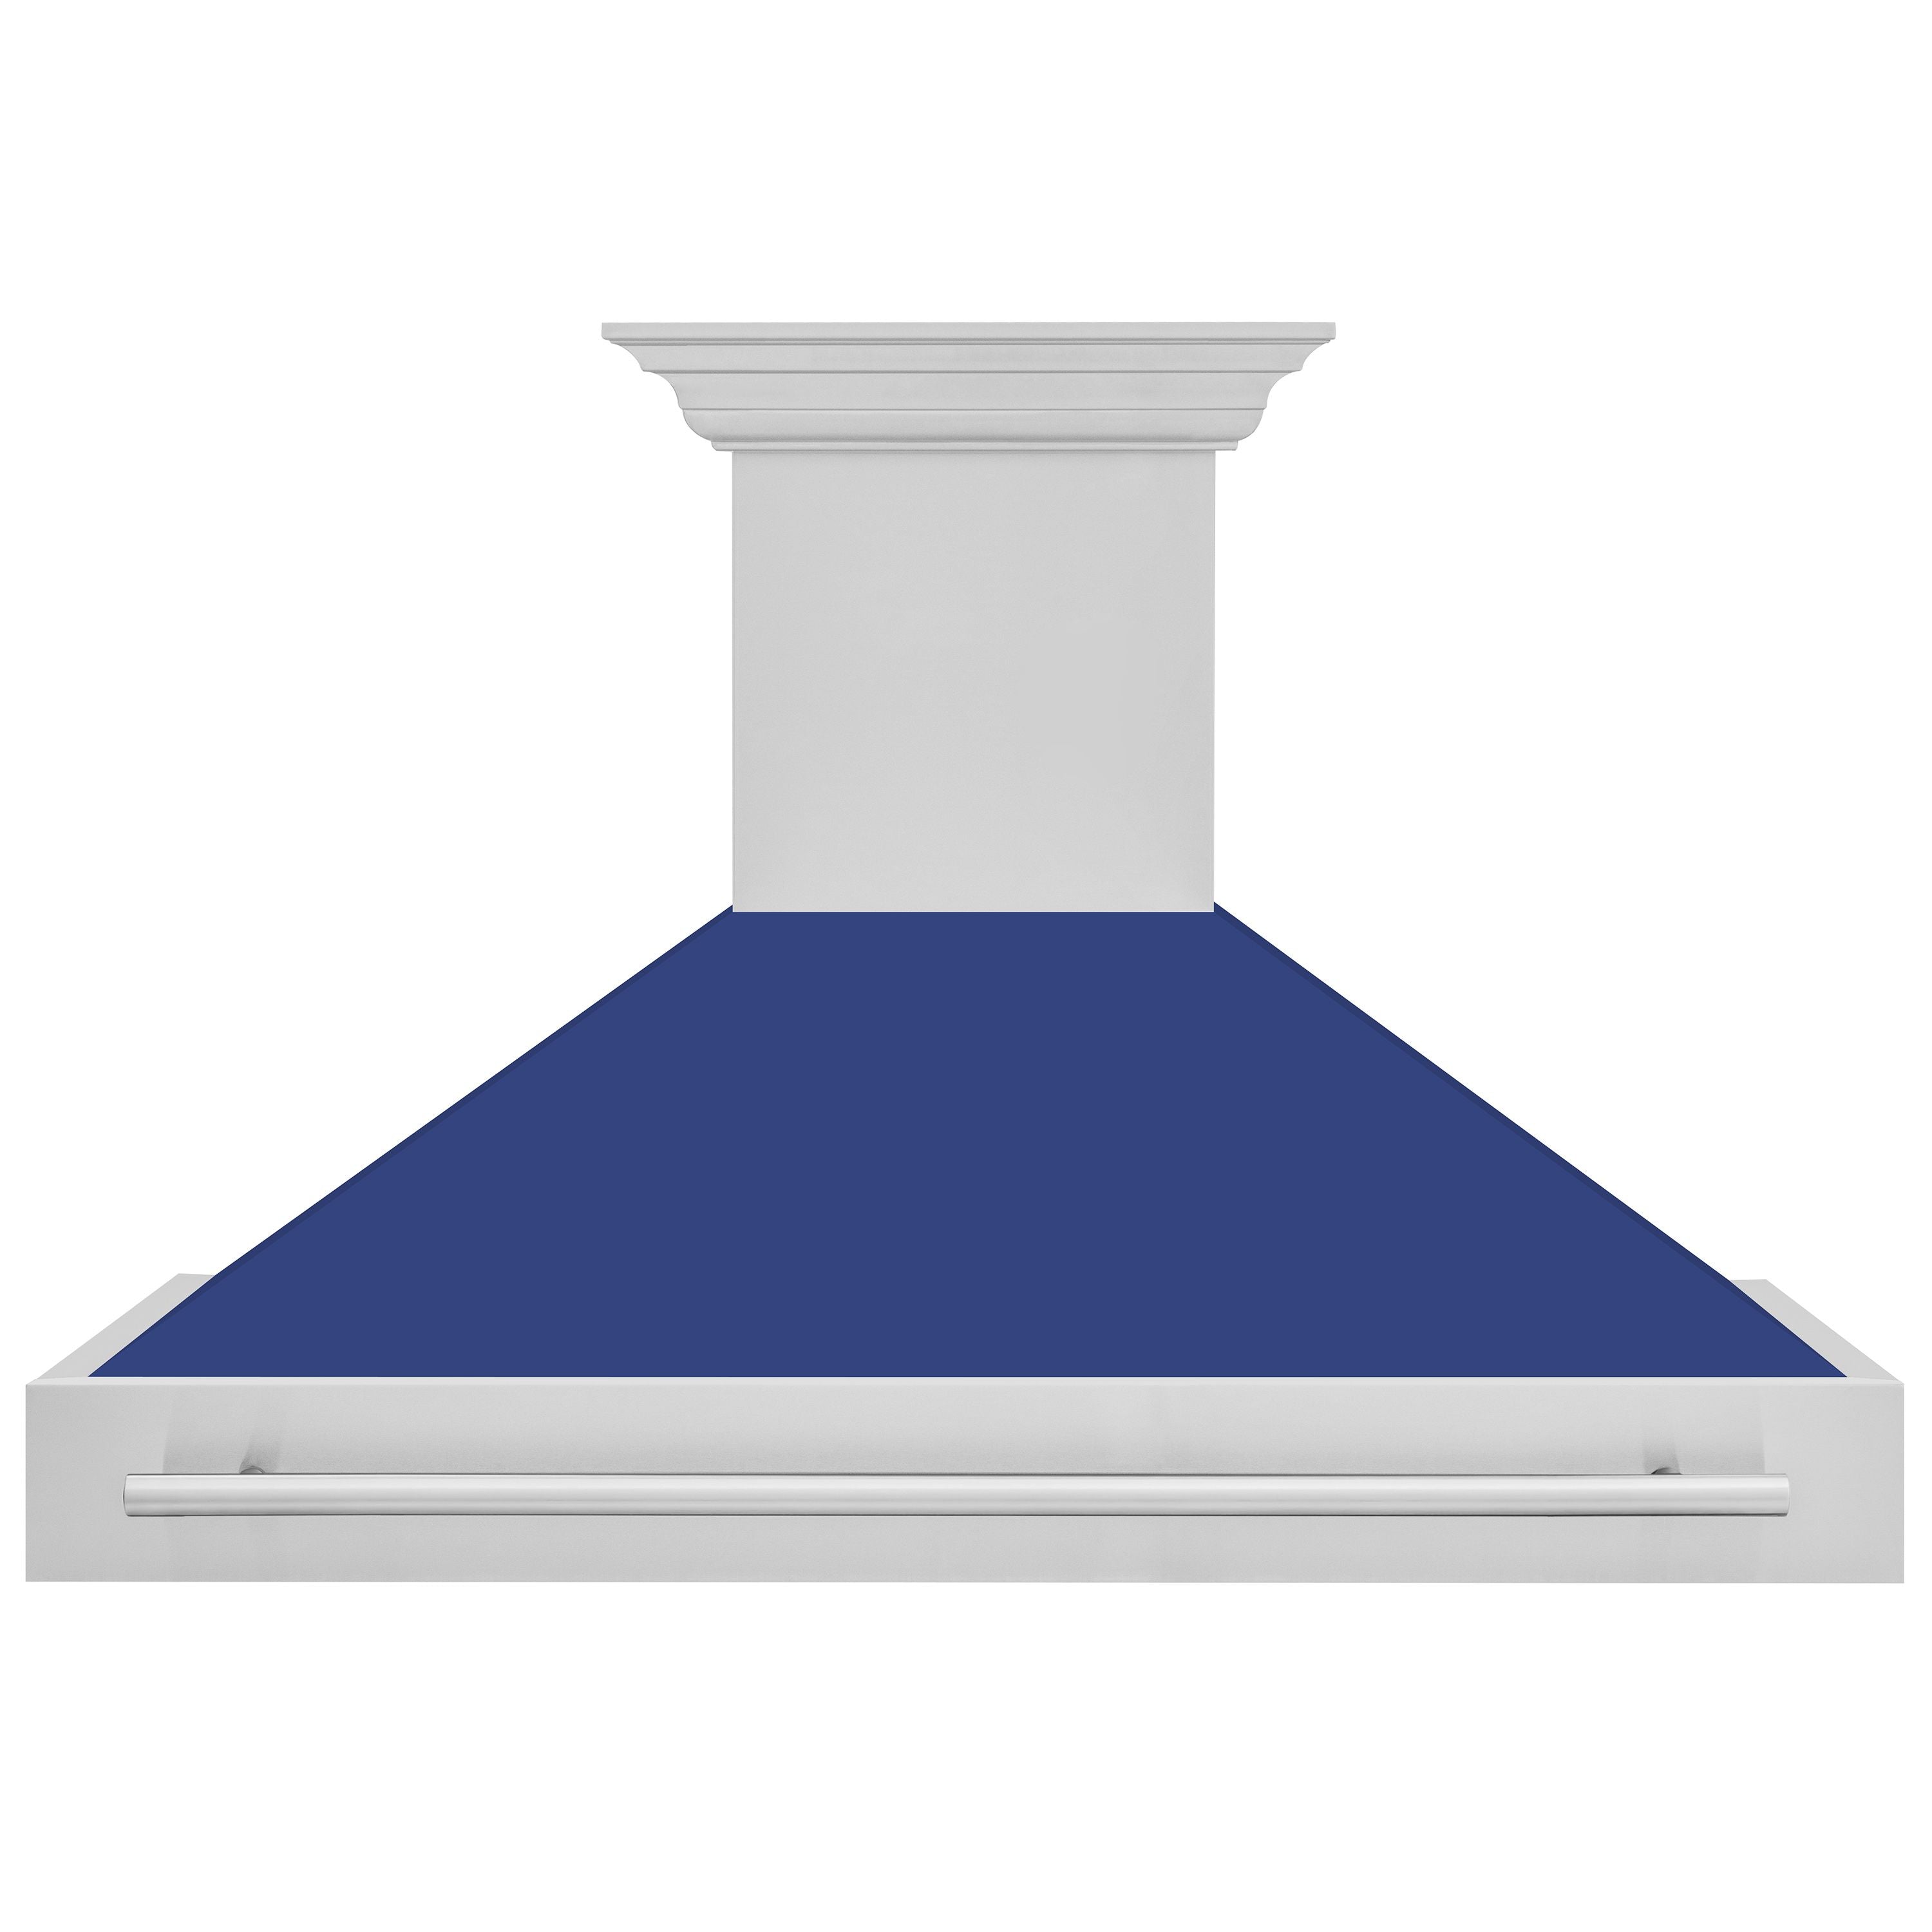 ZLINE 48 In. Stainless Steel Range Hood with Blue Matte Shell and Stainless Steel Handle, 8654STX-BM-48